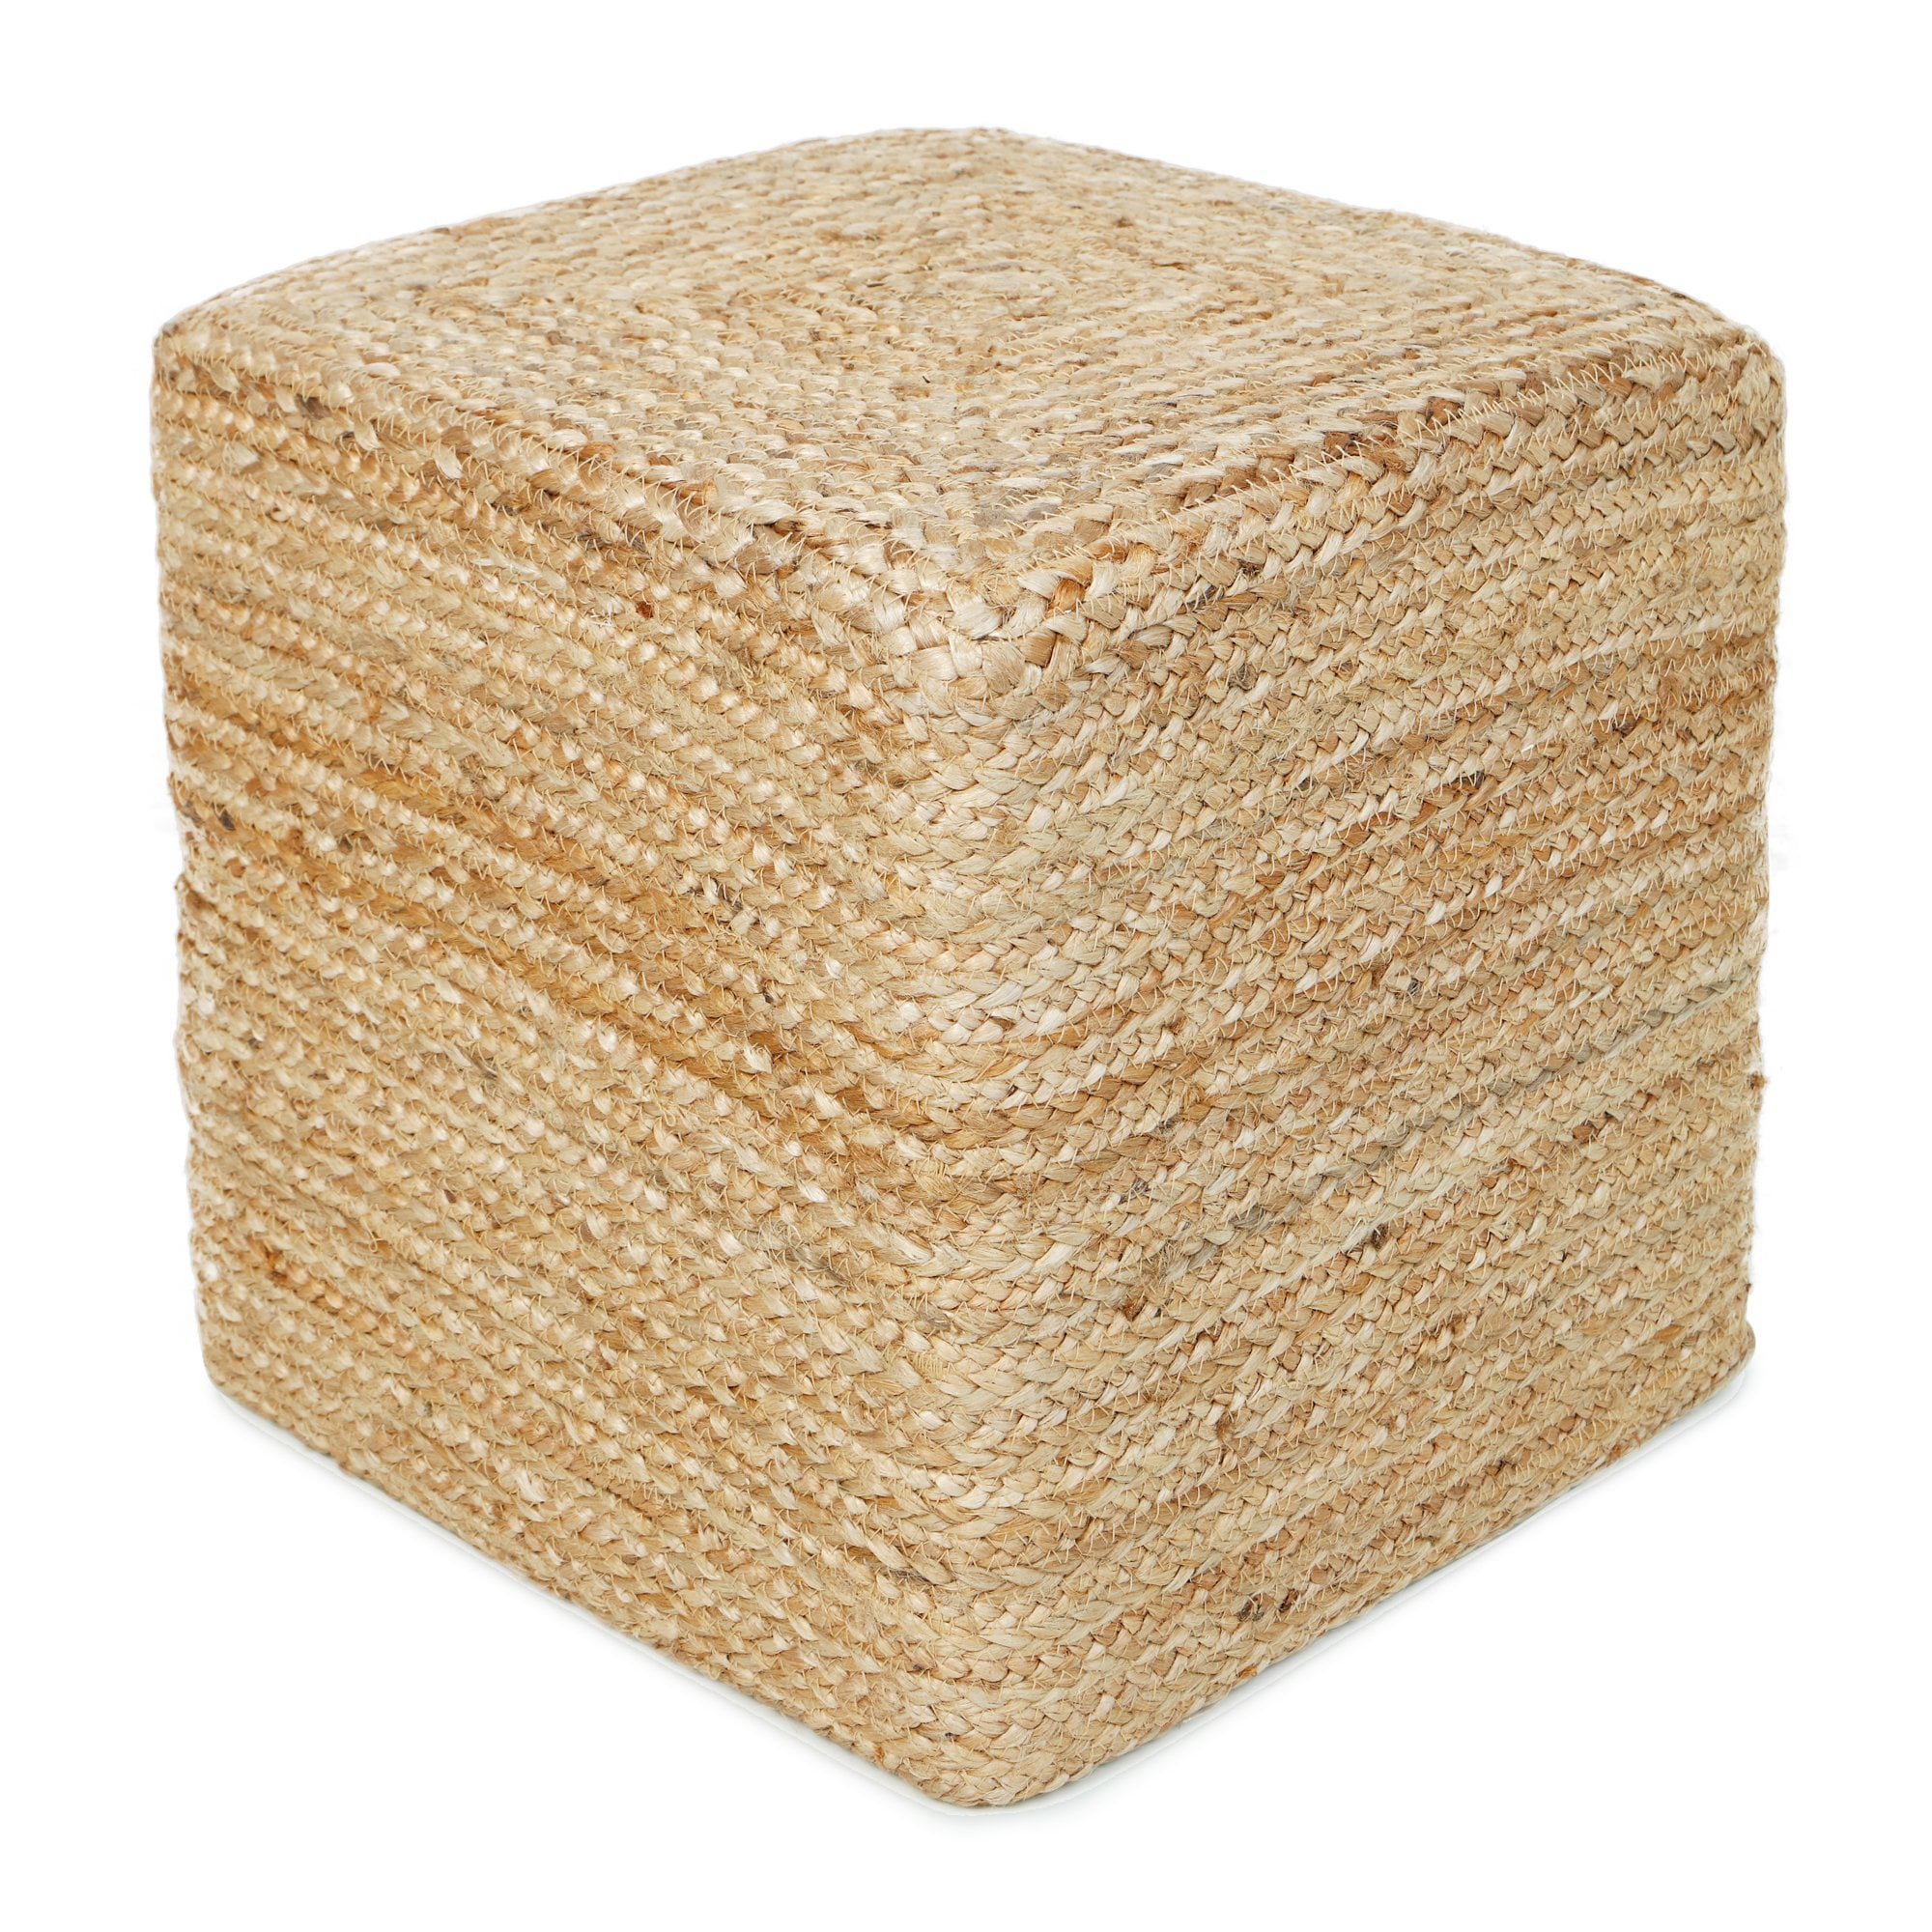 REDEARTH Cube Pouf Foot Stool Ottoman -Jute Braided Pouffe Poof Accent ...